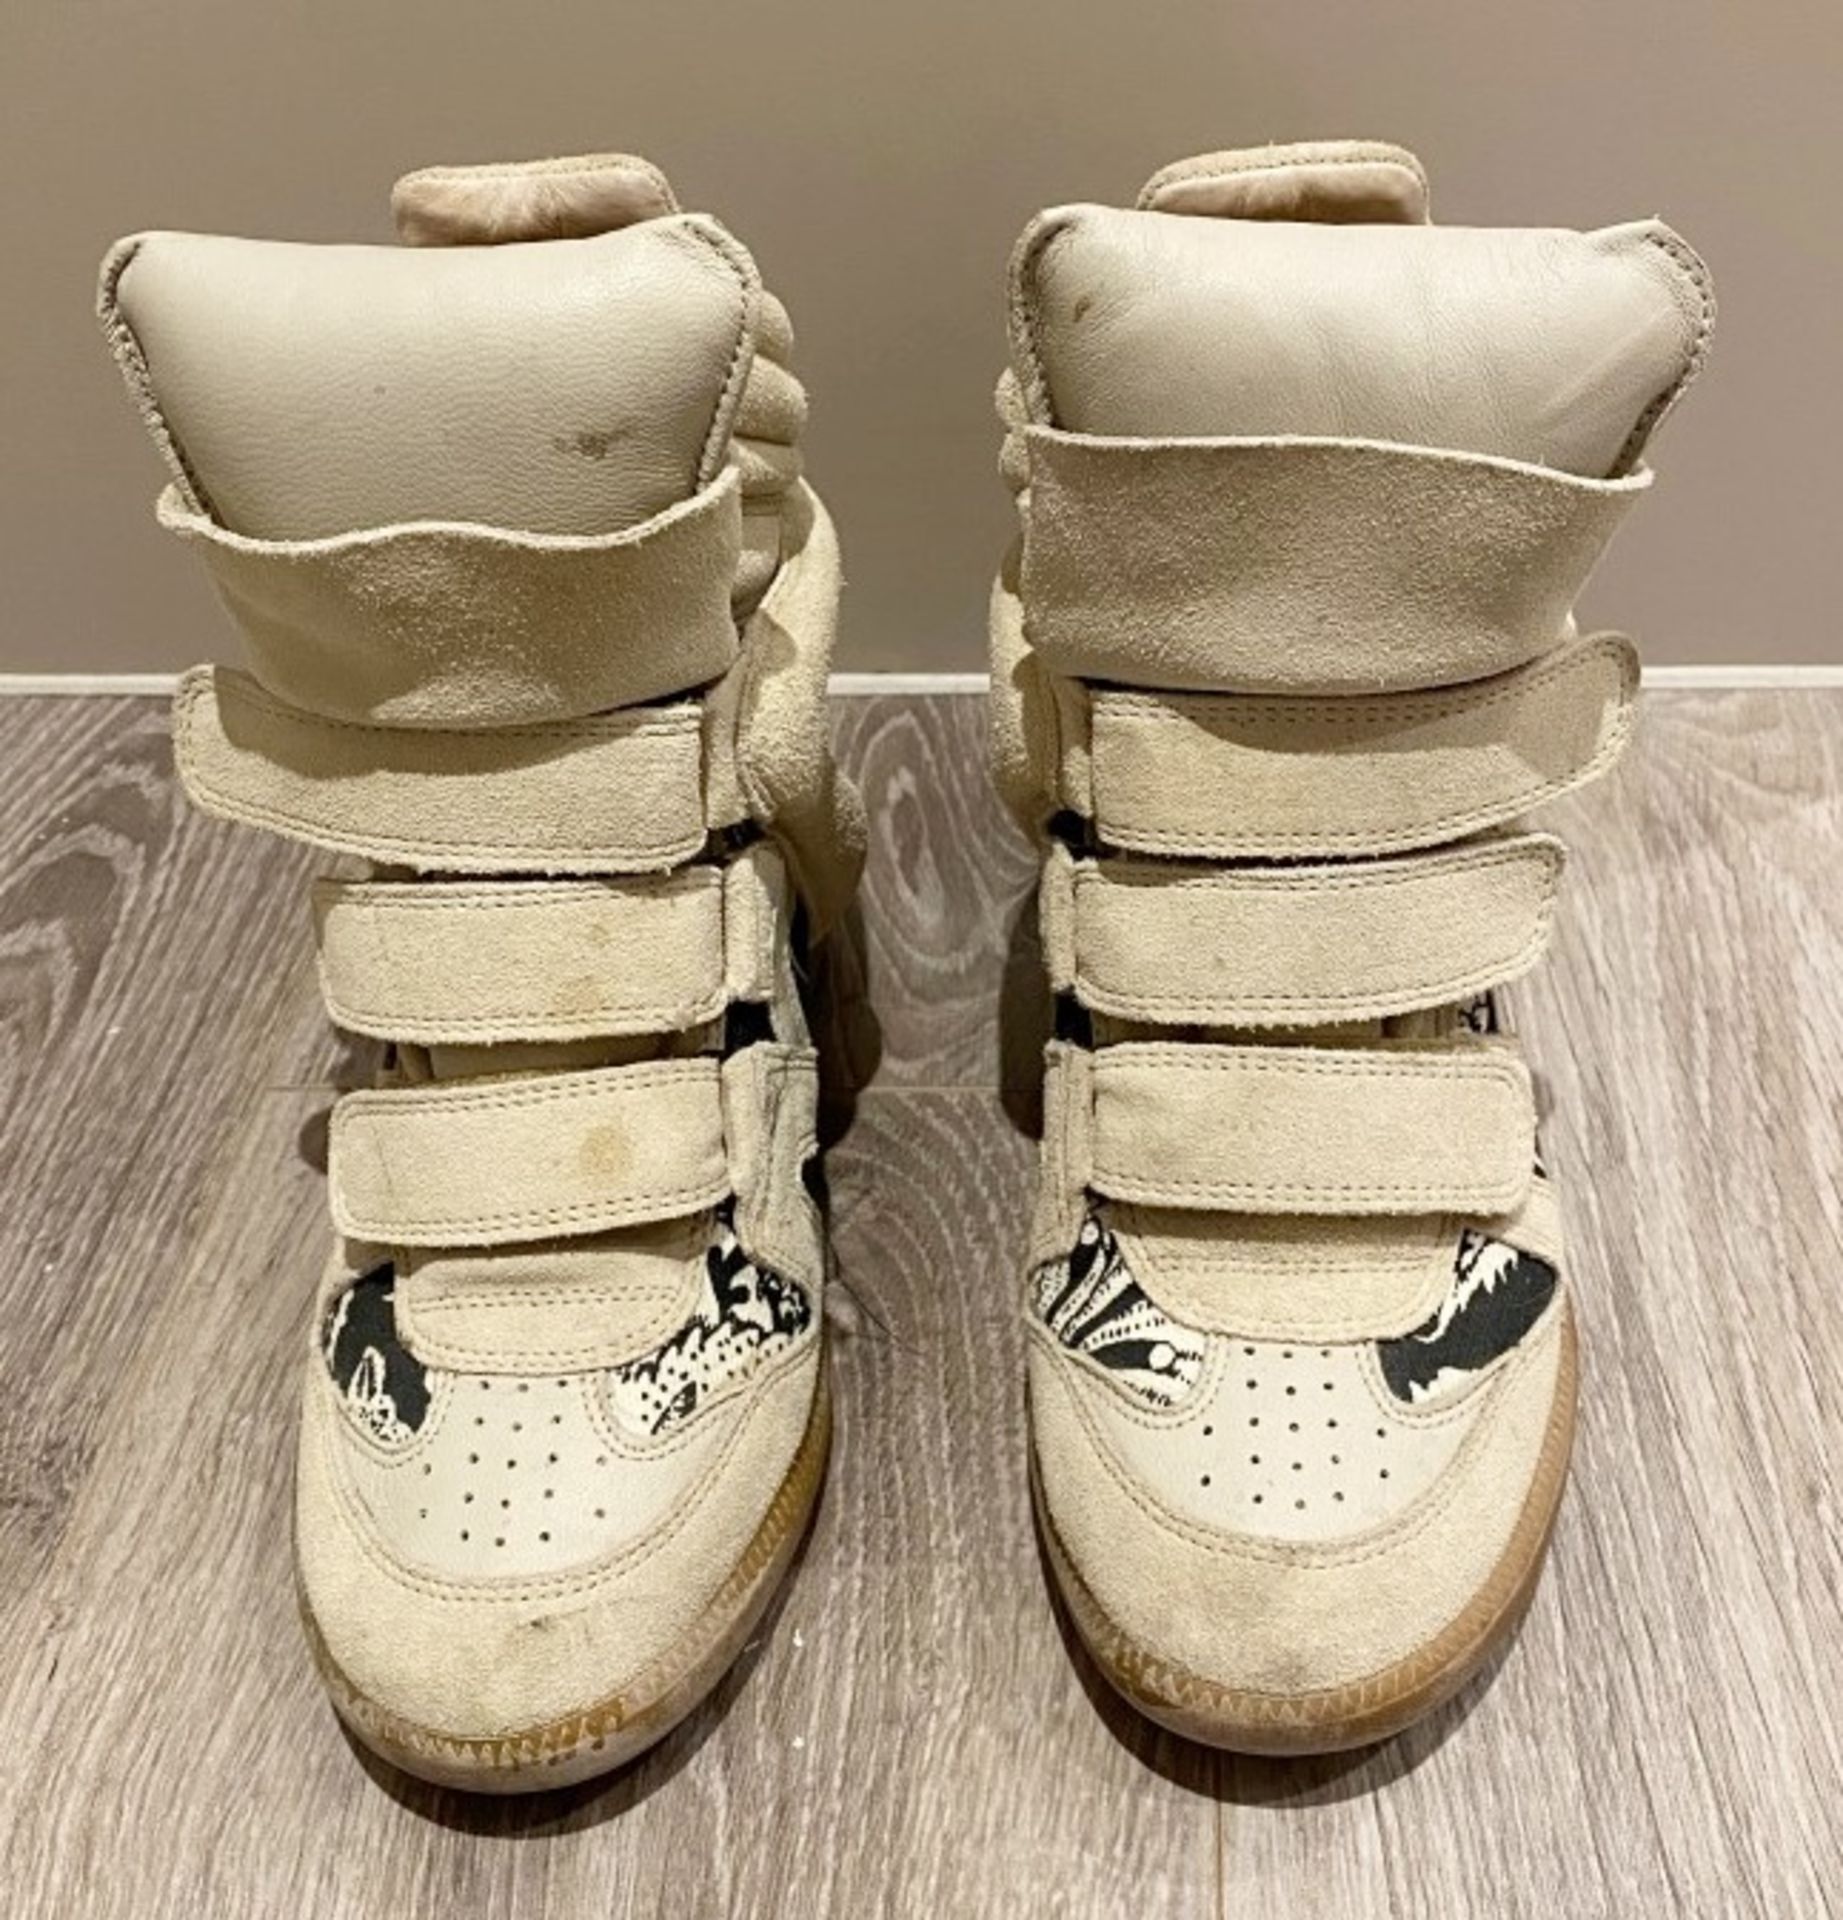 1 x Pair Of Genuine Isabel Marant Boots In Crème And Black - Size: 36 - Preowned in Very Good Condit - Image 3 of 4